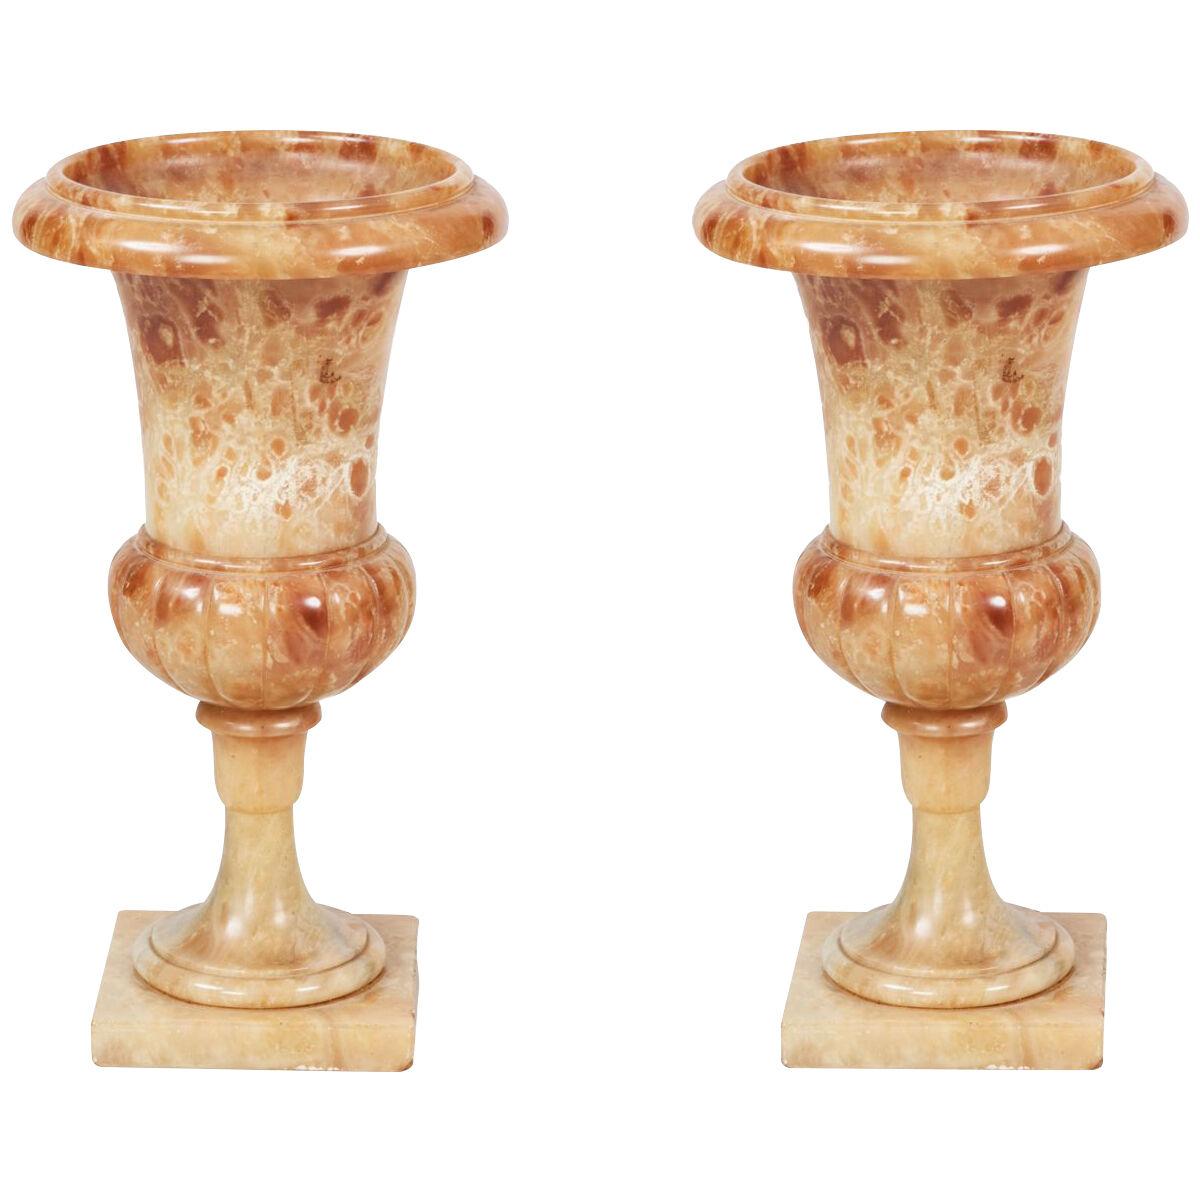 19th Century pair of Italian hand-carved alabaster urns converted to lamps